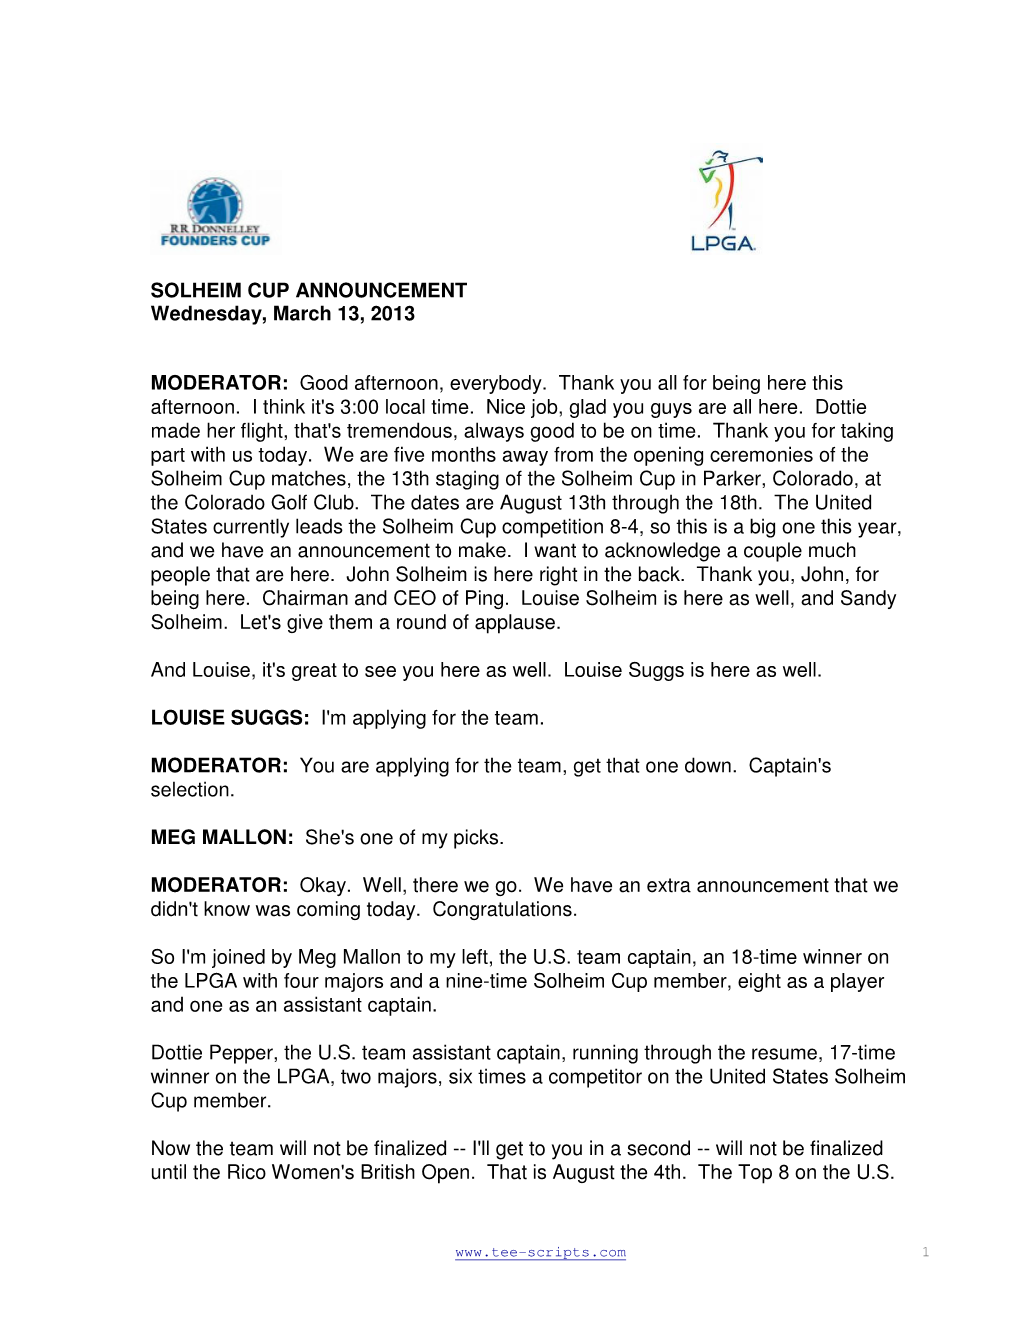 SOLHEIM CUP ANNOUNCEMENT Wednesday, March 13, 2013